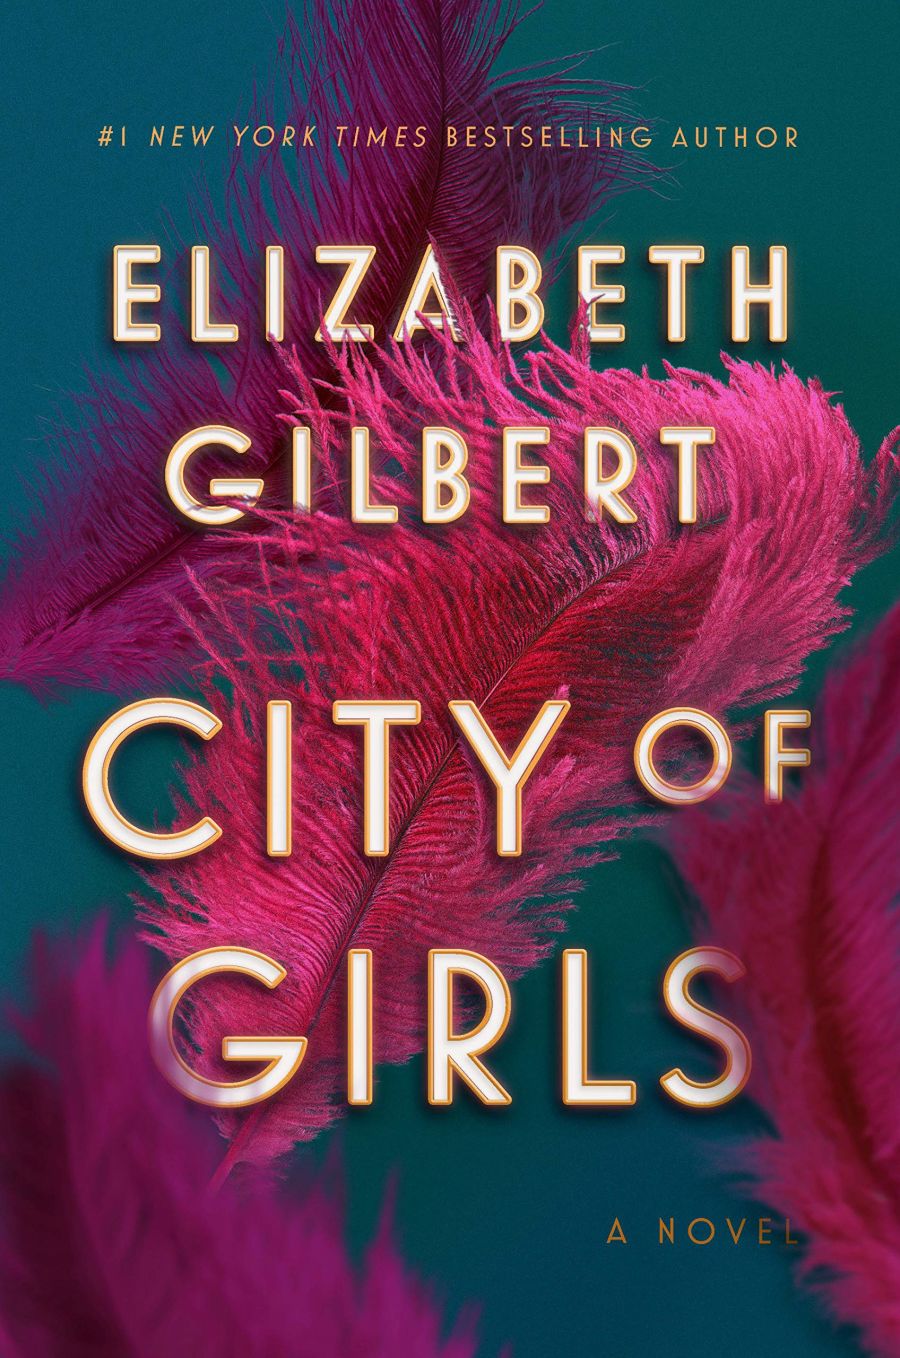 Book cover: City of girls, by Elizabeth Gilbert.